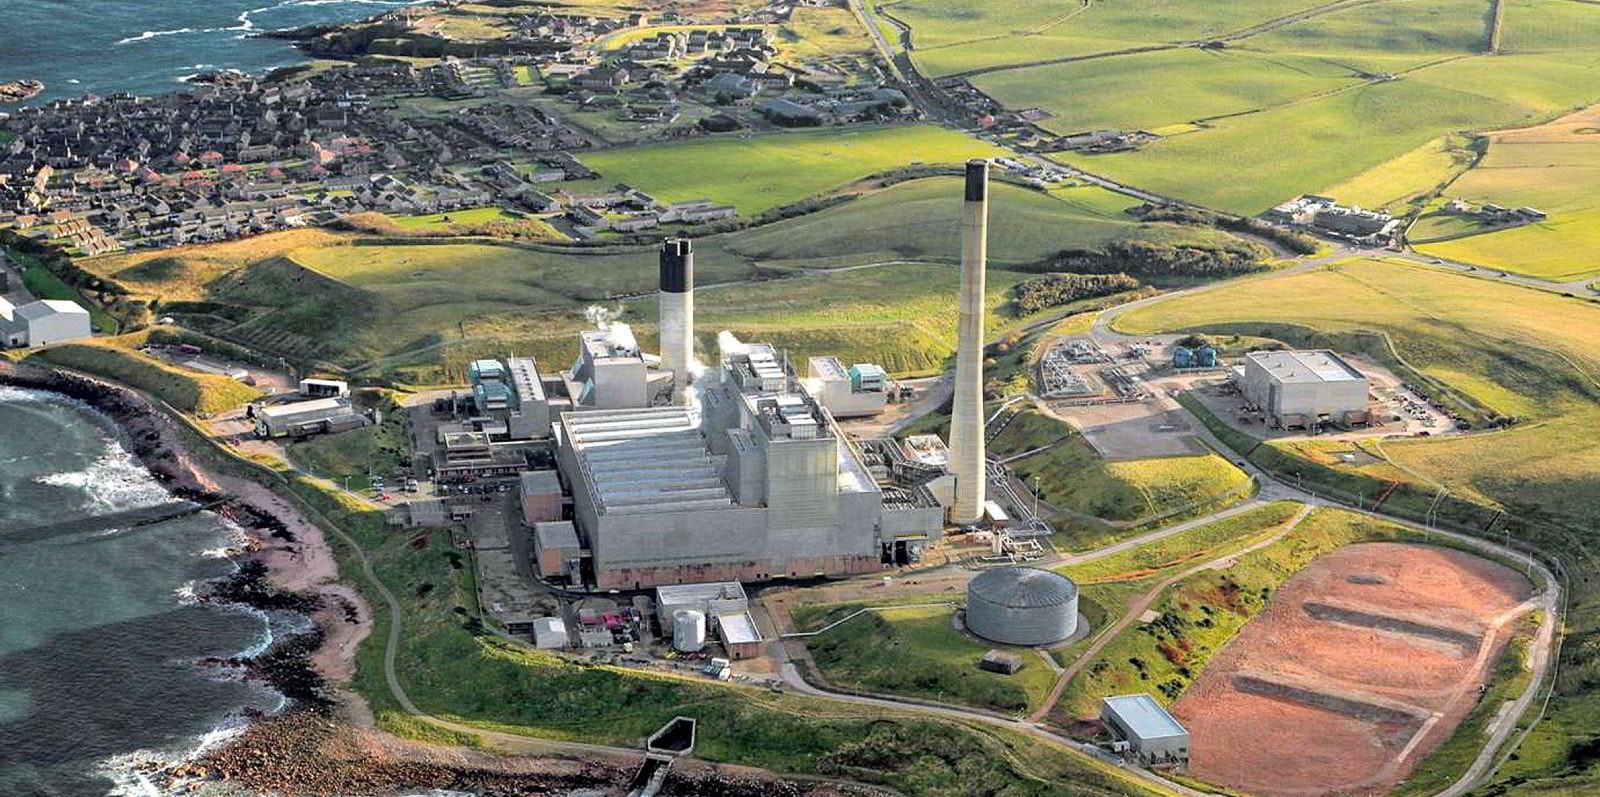 A carbon capture and storage plant in the UK